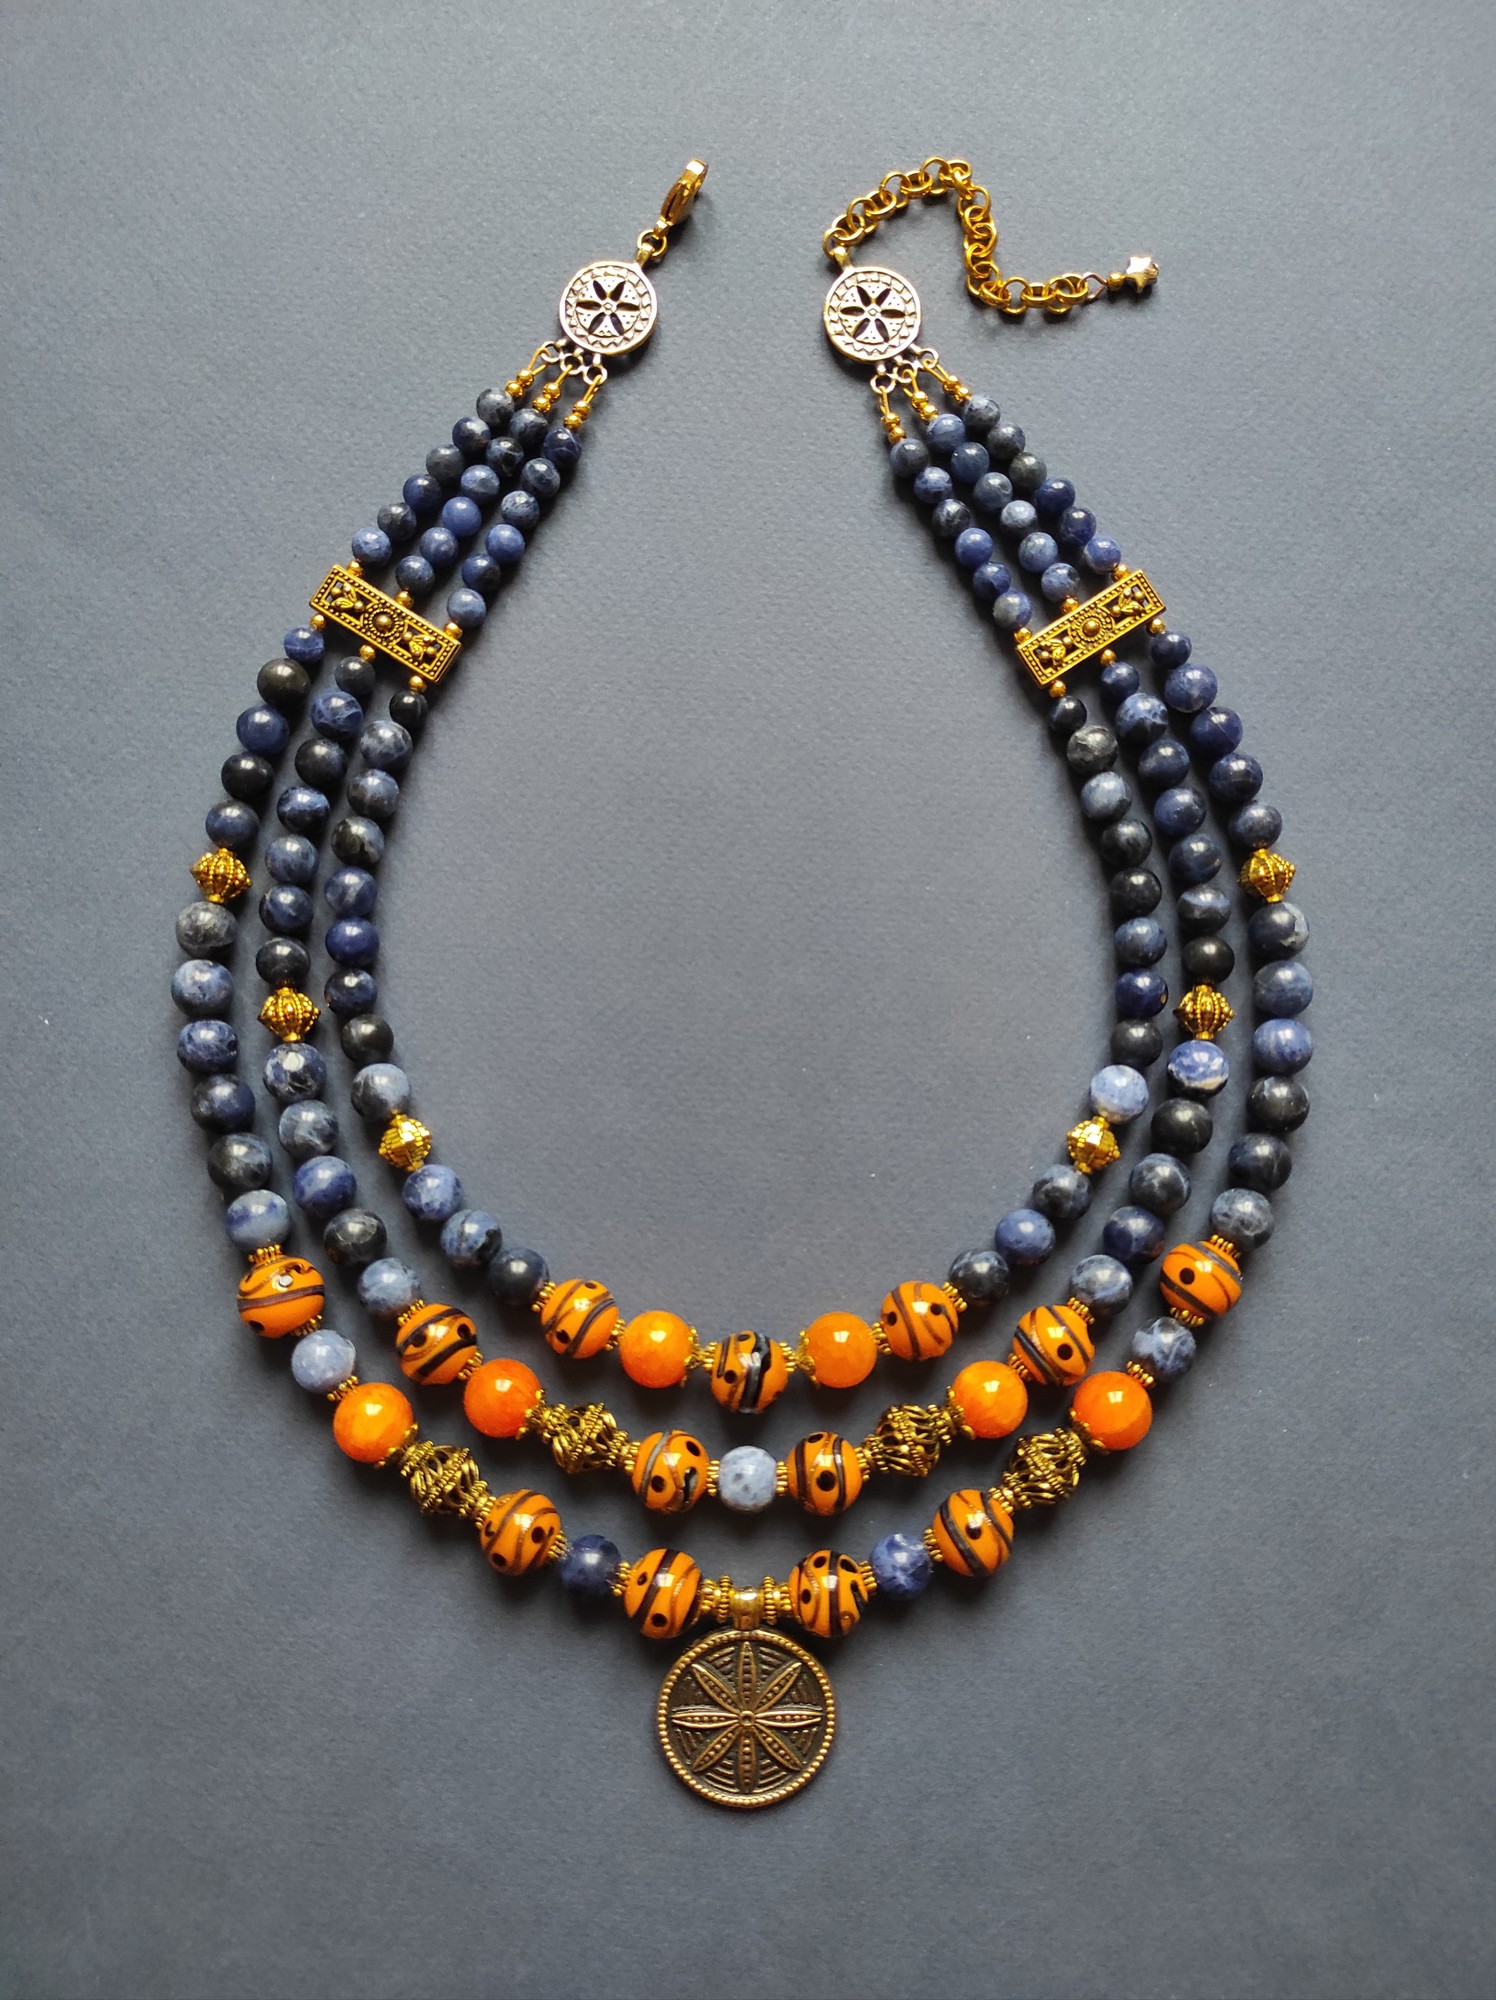 Necklace "Ukrainian sunset" from glass beads and sodalite